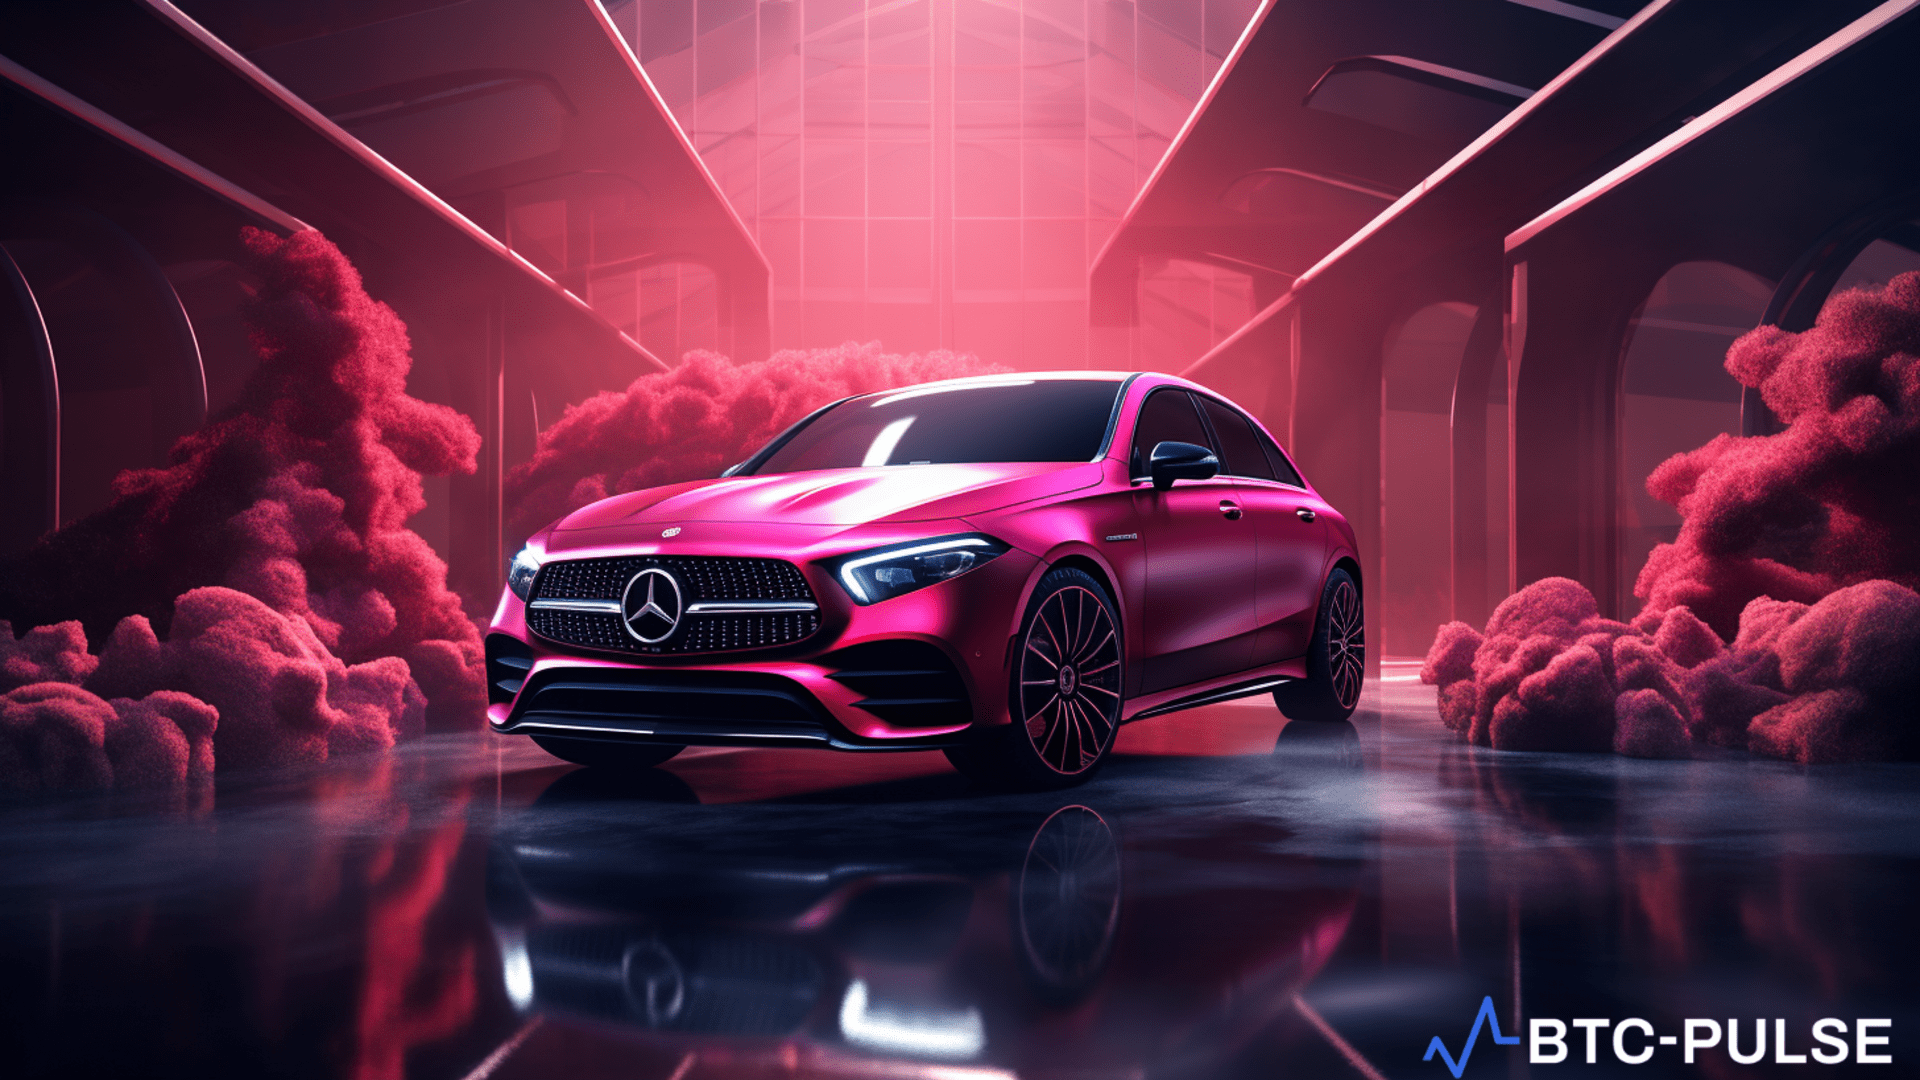 Mercedes-Benz NXT Partners with Mojito to Launch New NFT Collection